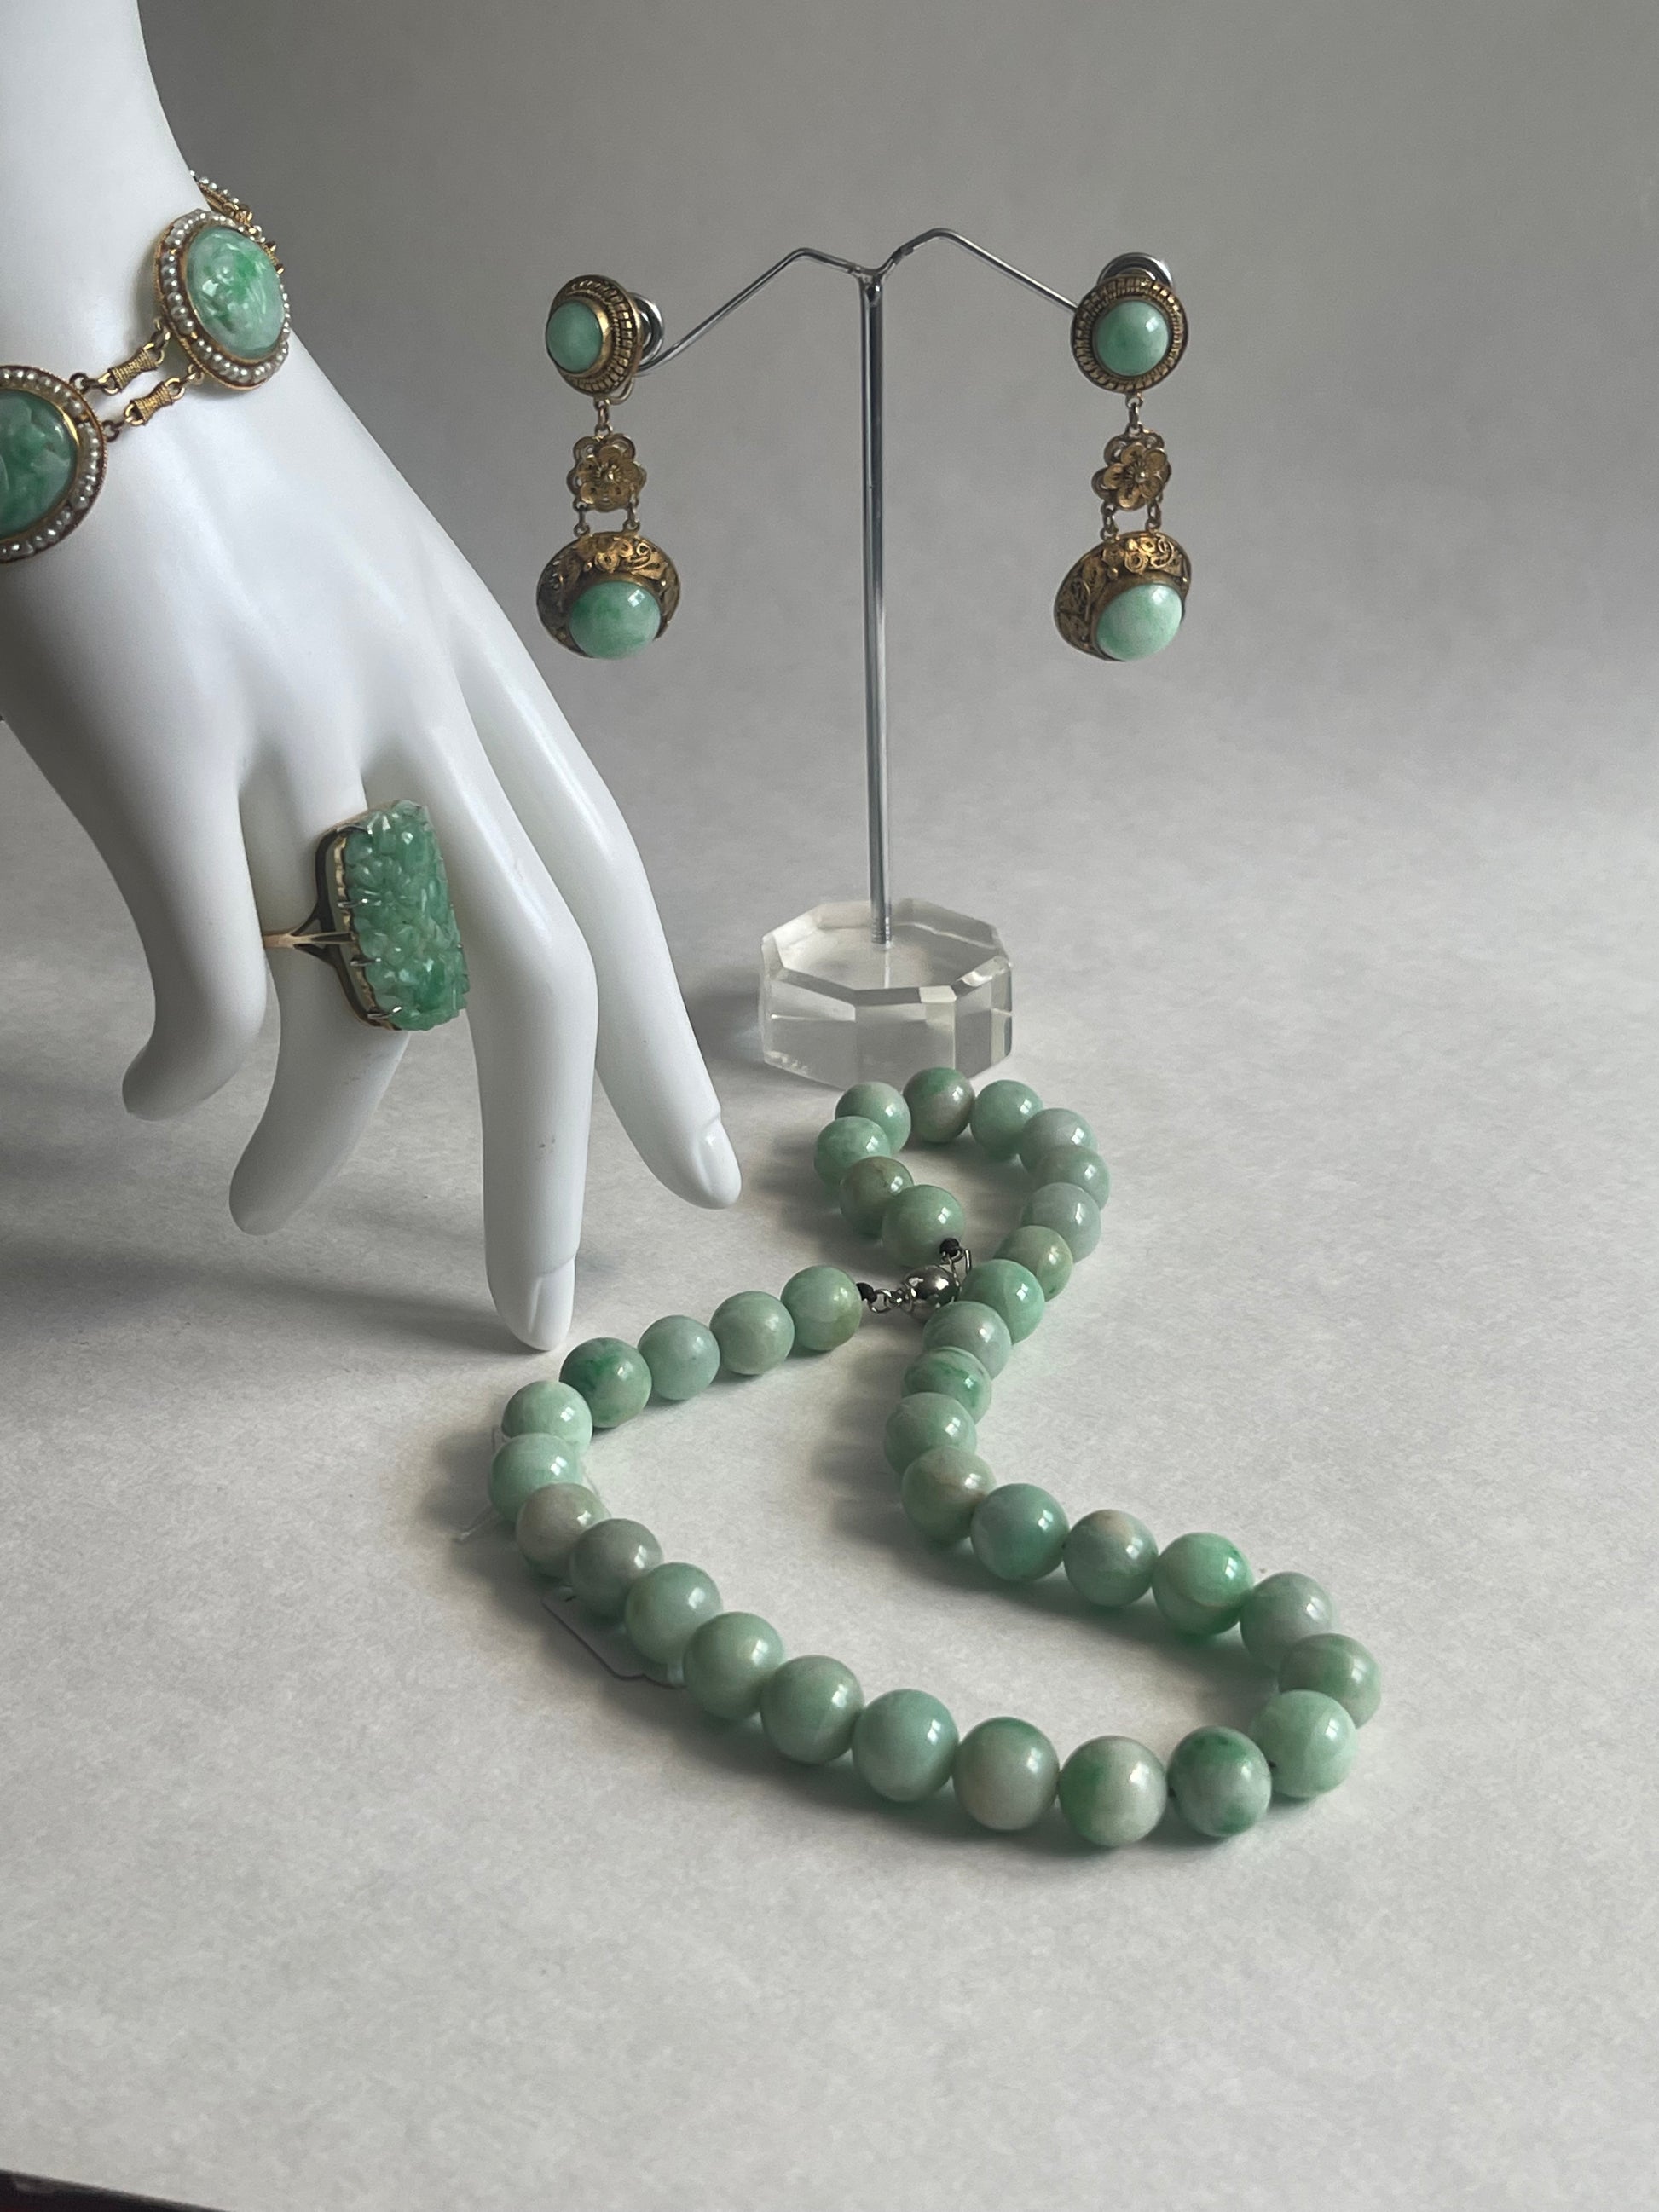 A Necklace with Vintage Carved Jade Shou Beads and Pearls